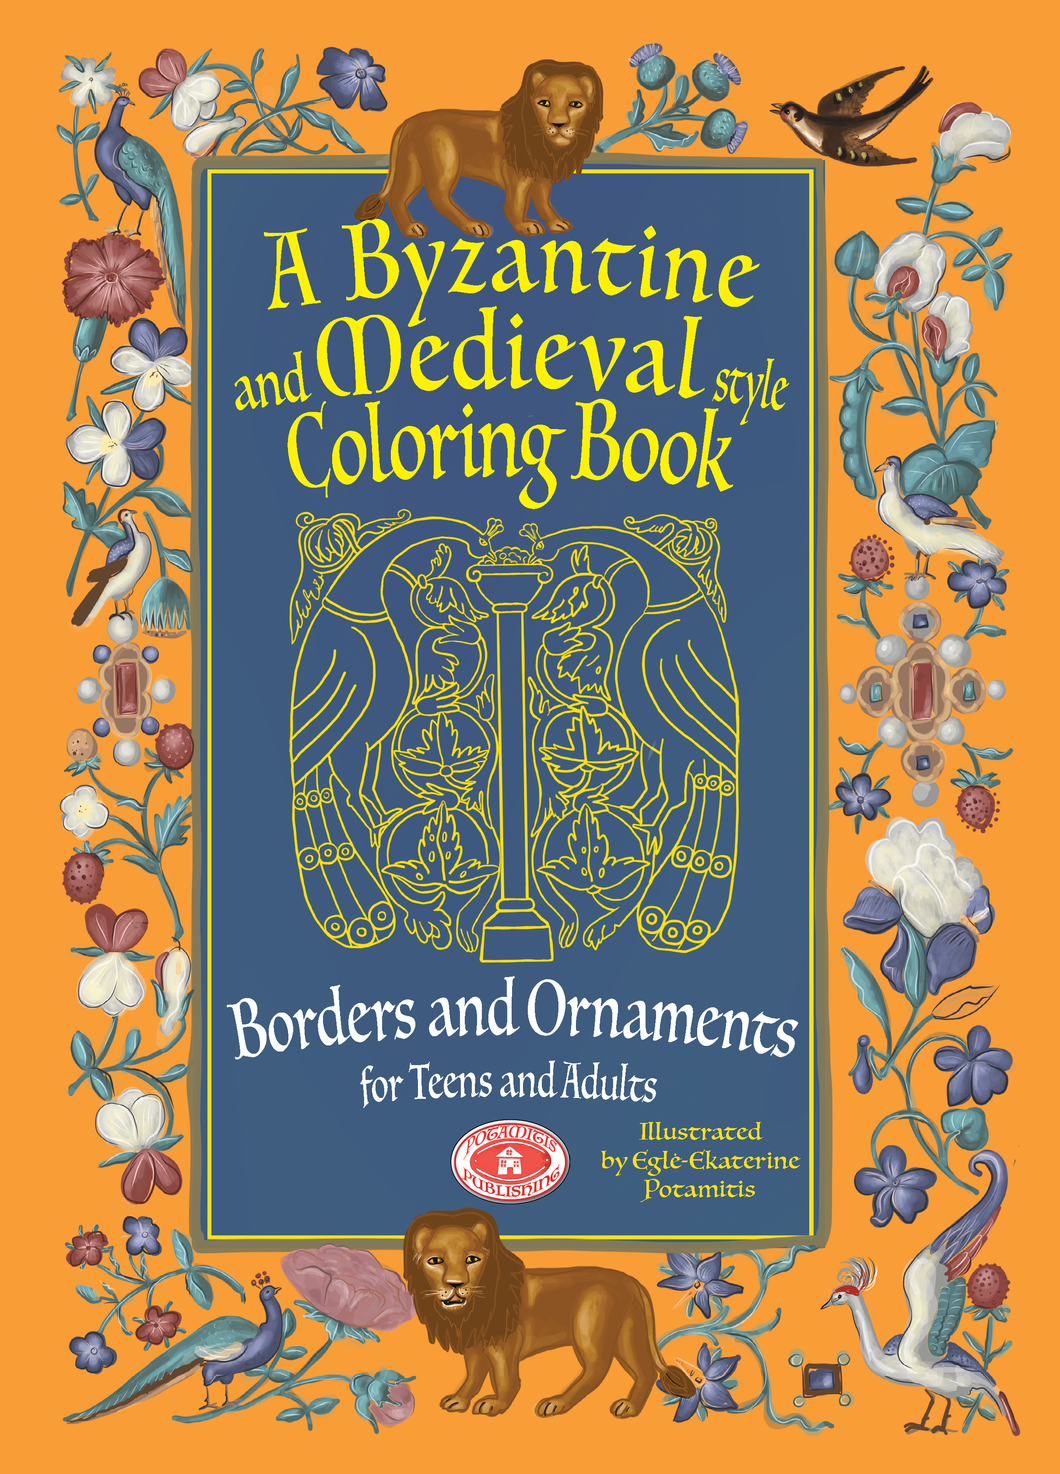 Orthodox Coloring Books #58 - A Byzantine and Medieval style Coloring Book - Borders and Ornaments - For Teens and Adults